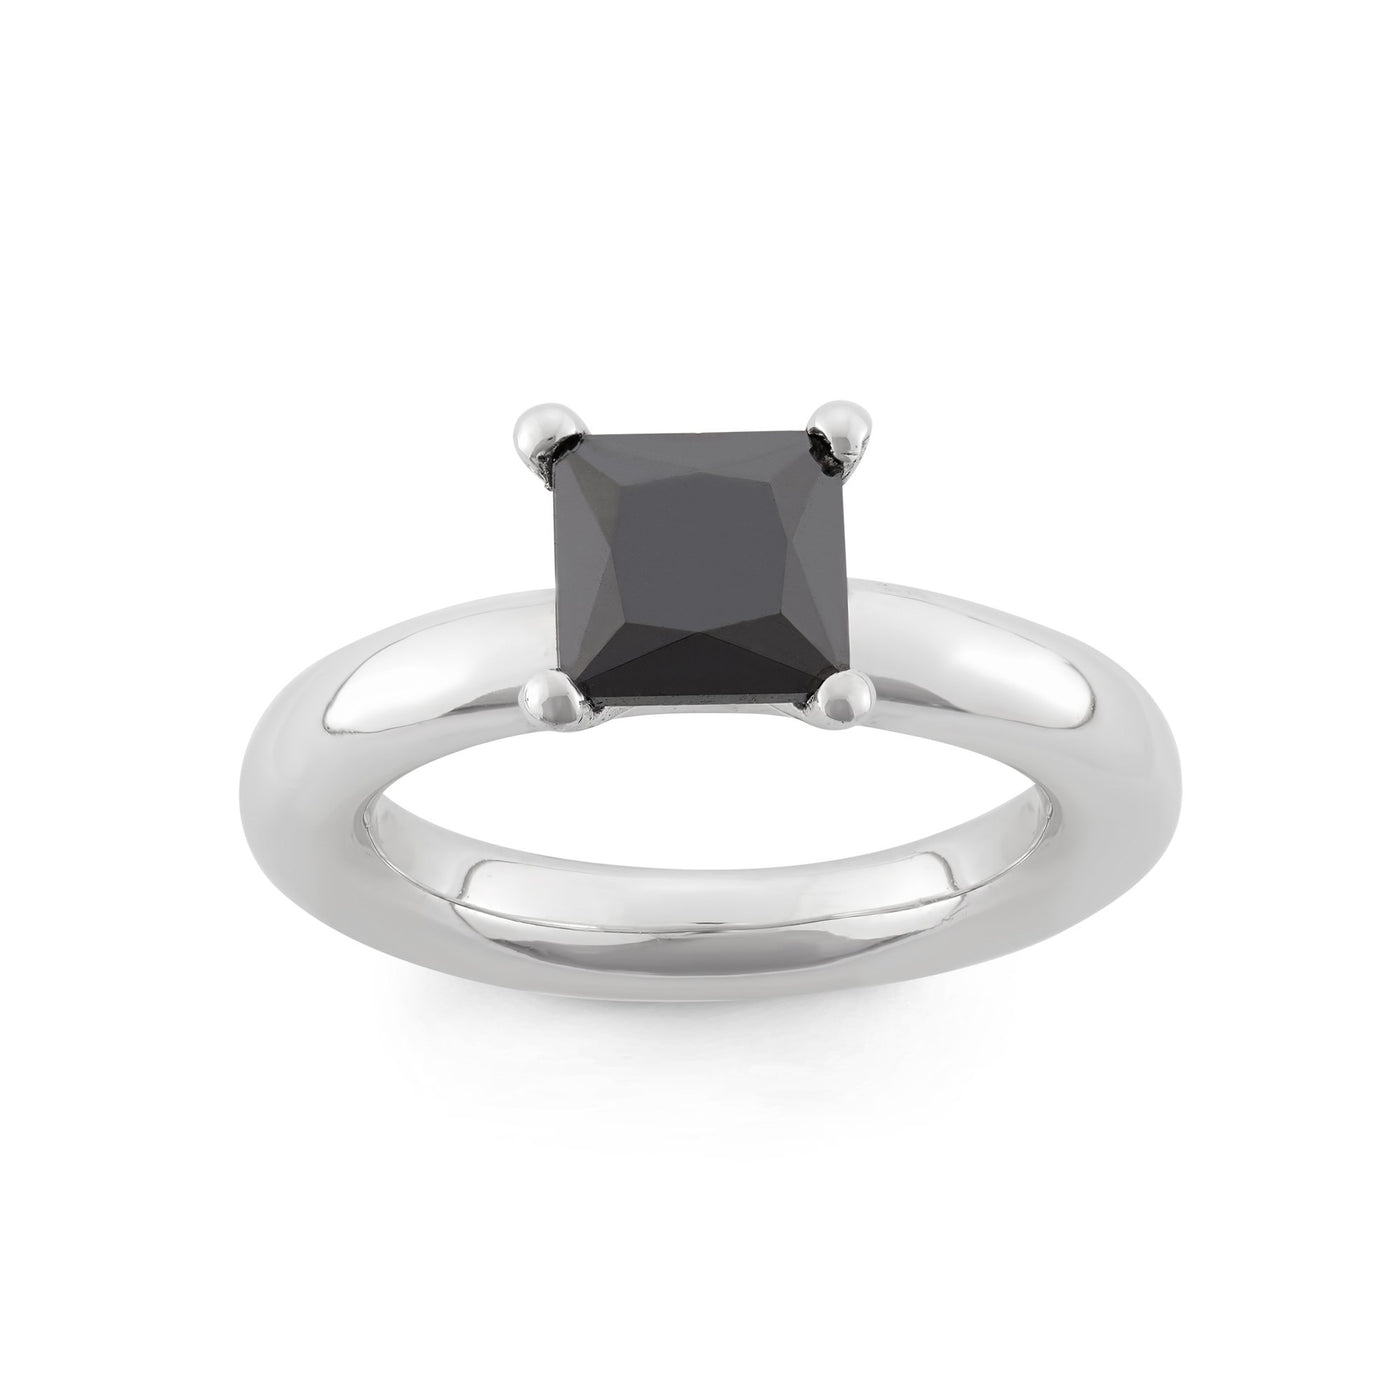 Sterling Silver Spinning Ring With Faceted Black Square CZ Center Stone